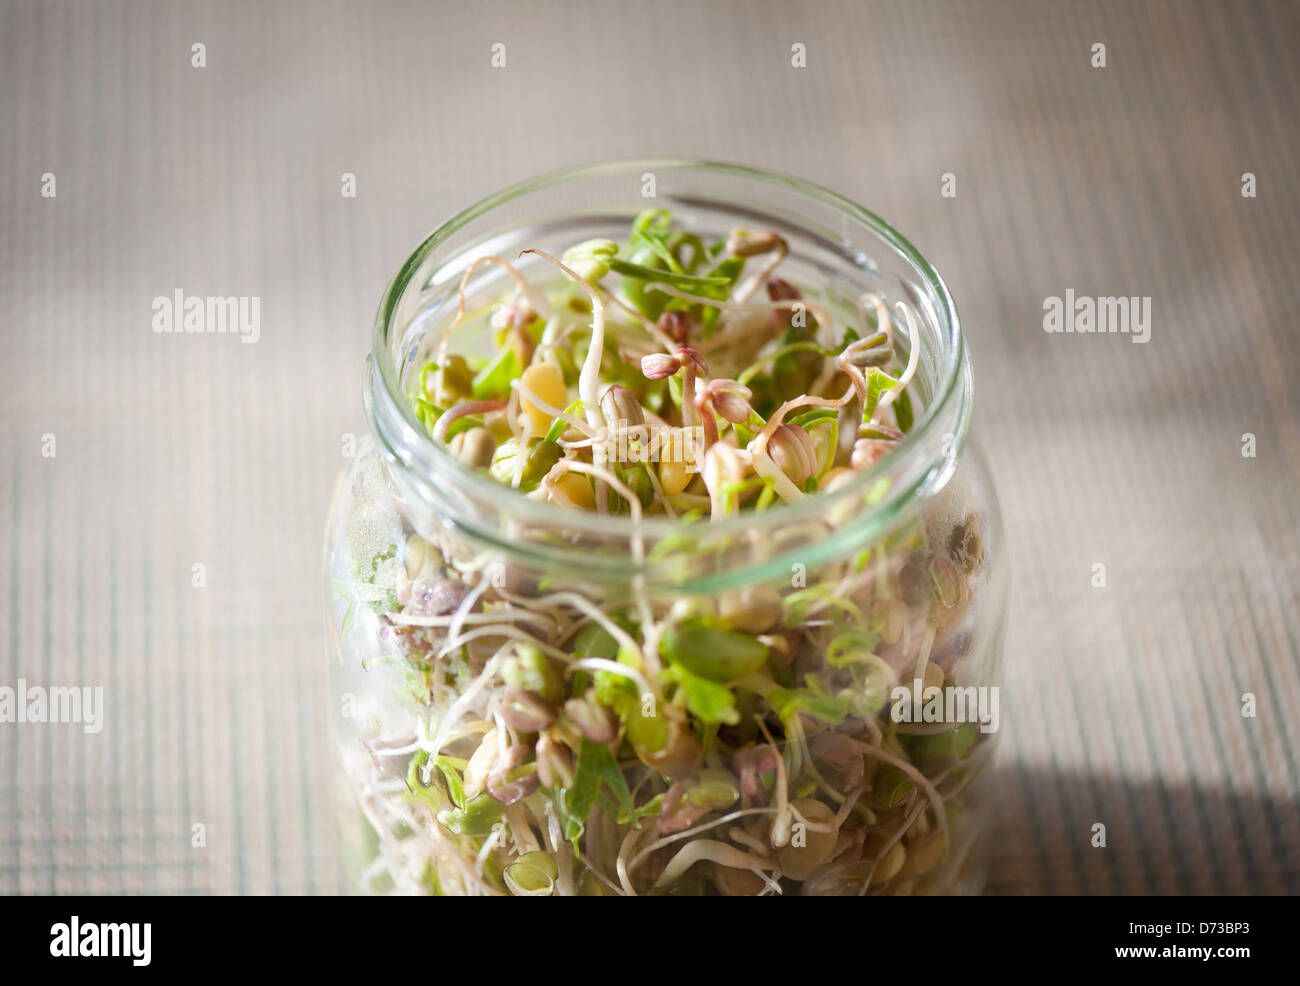 Mix of cereal sprouts growing in glass jar Stock Photo